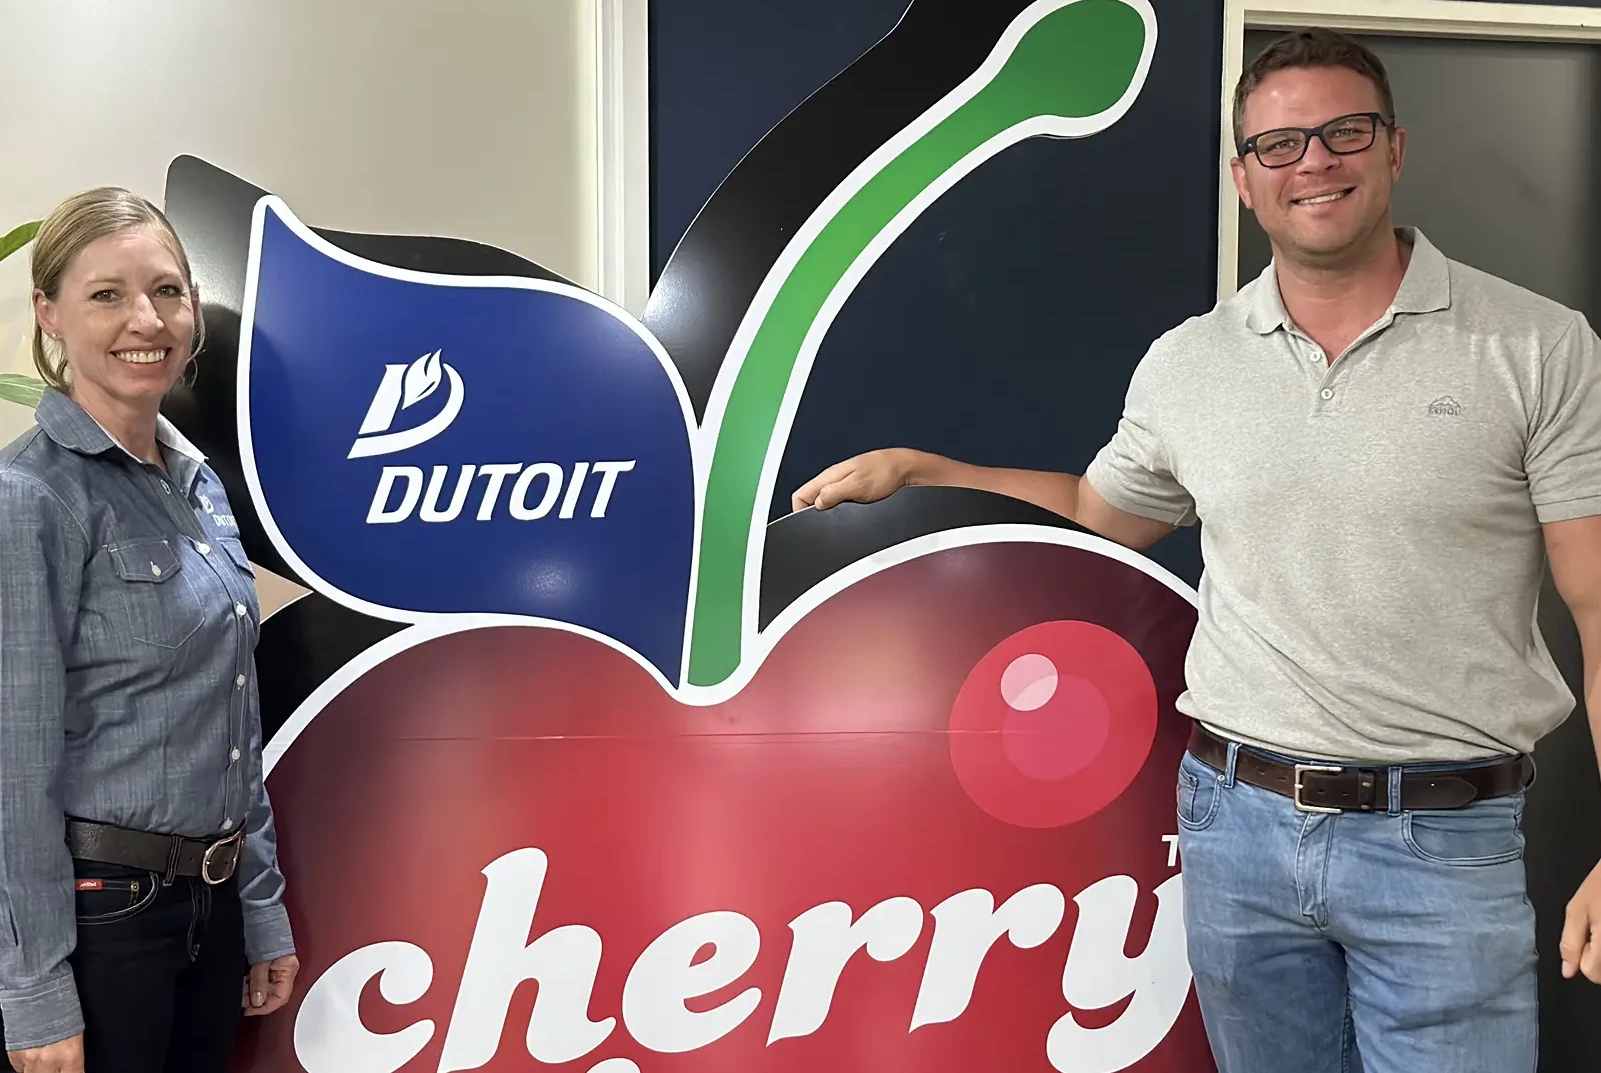 Dutoit leading the way to South Africa cherries around the globe